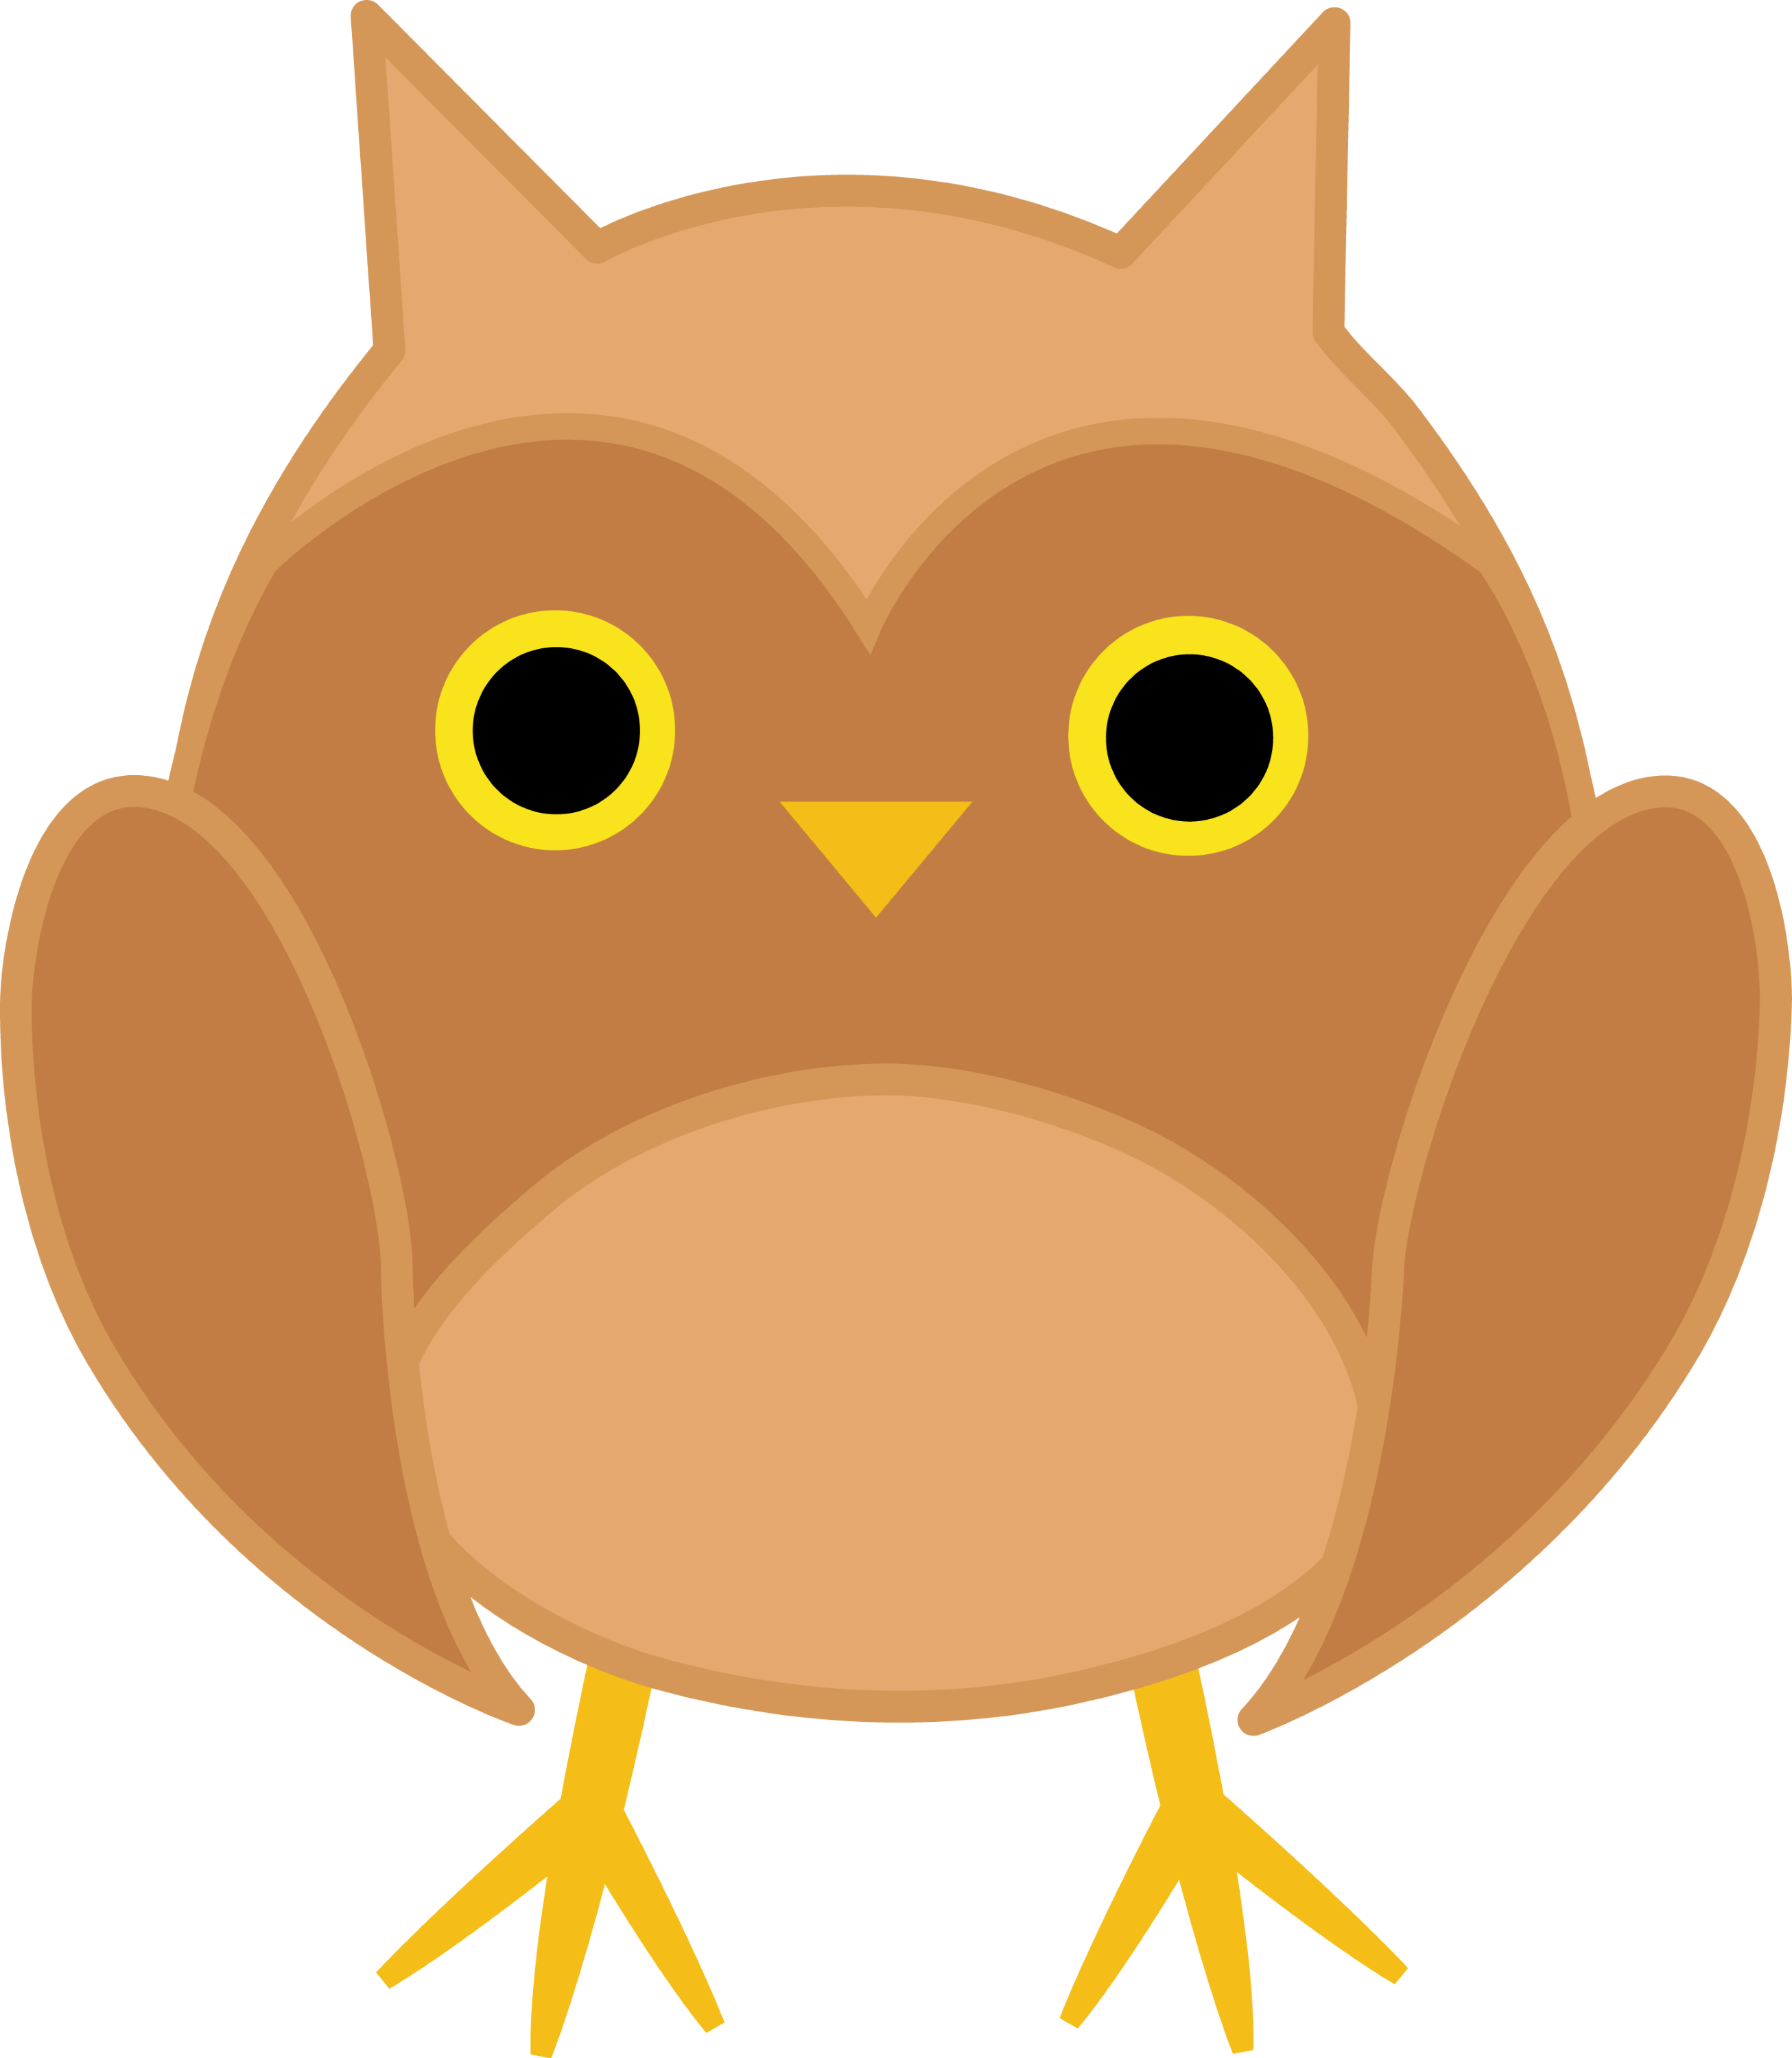 free clipart of owl - photo #20